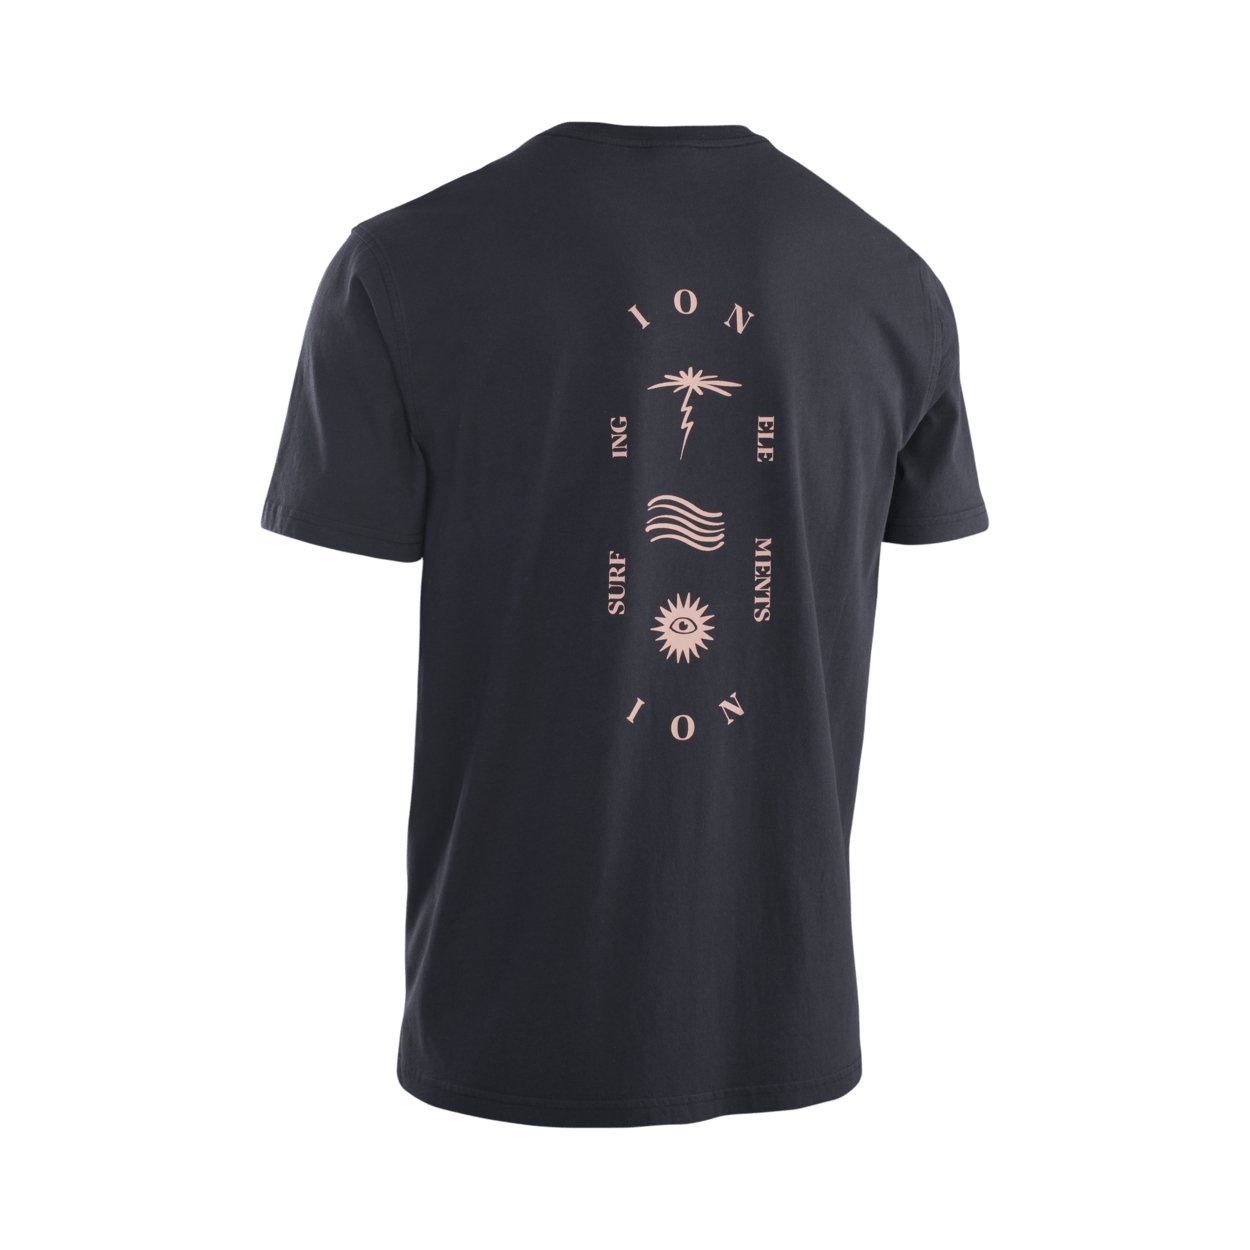 ION Tee Vibes SS men 2023 - Worthing Watersports - 9010583102733 - Apparel - ION Bike